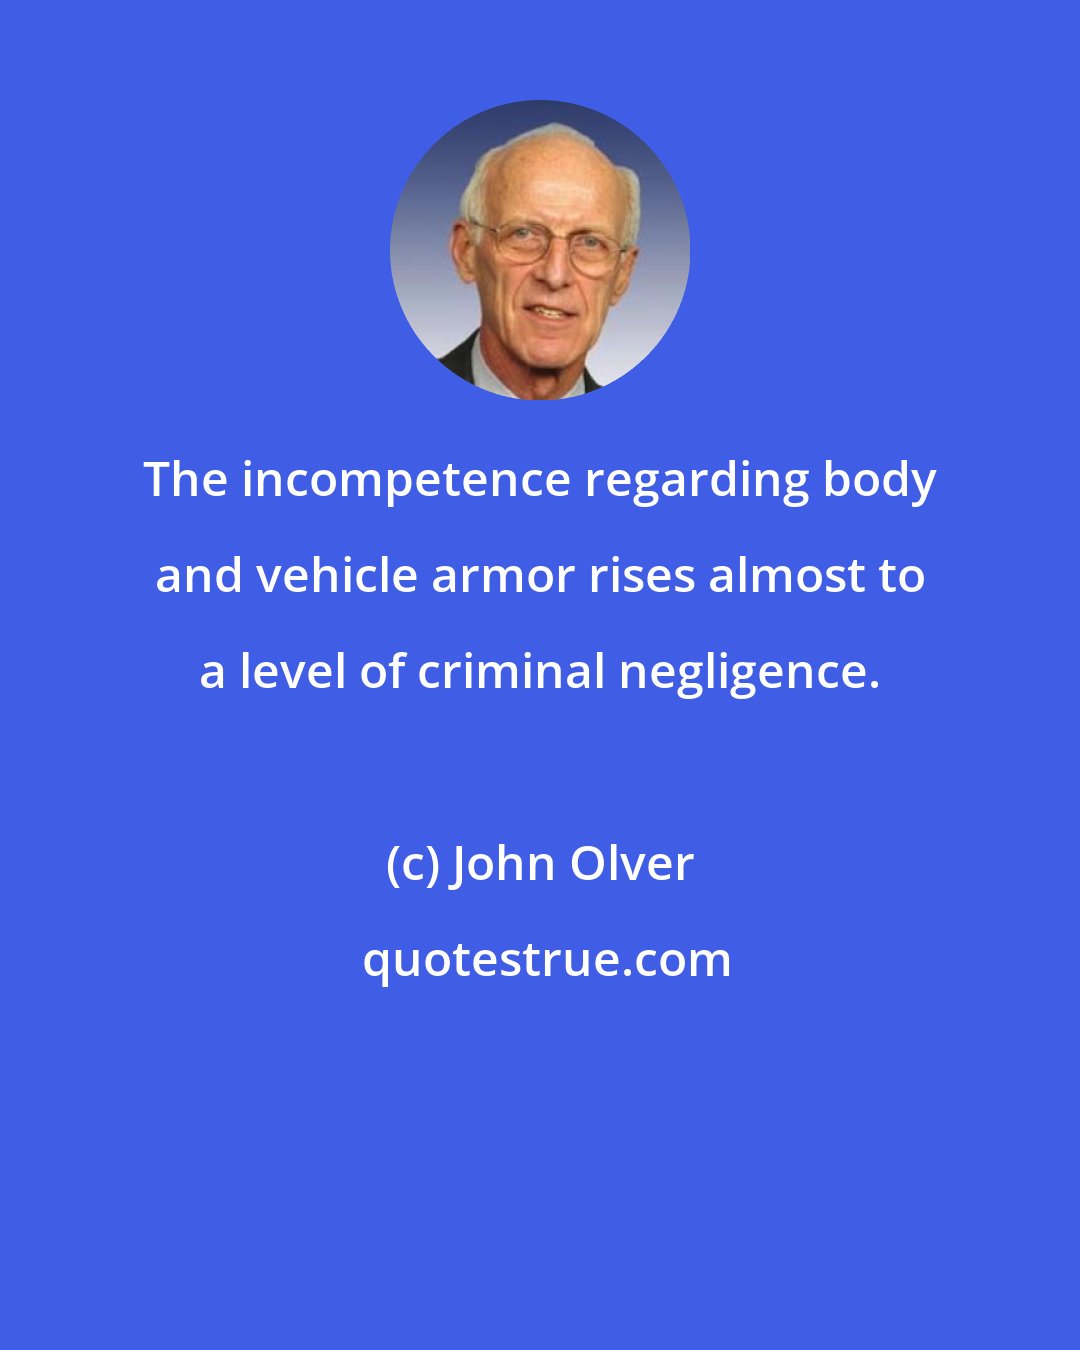 John Olver: The incompetence regarding body and vehicle armor rises almost to a level of criminal negligence.